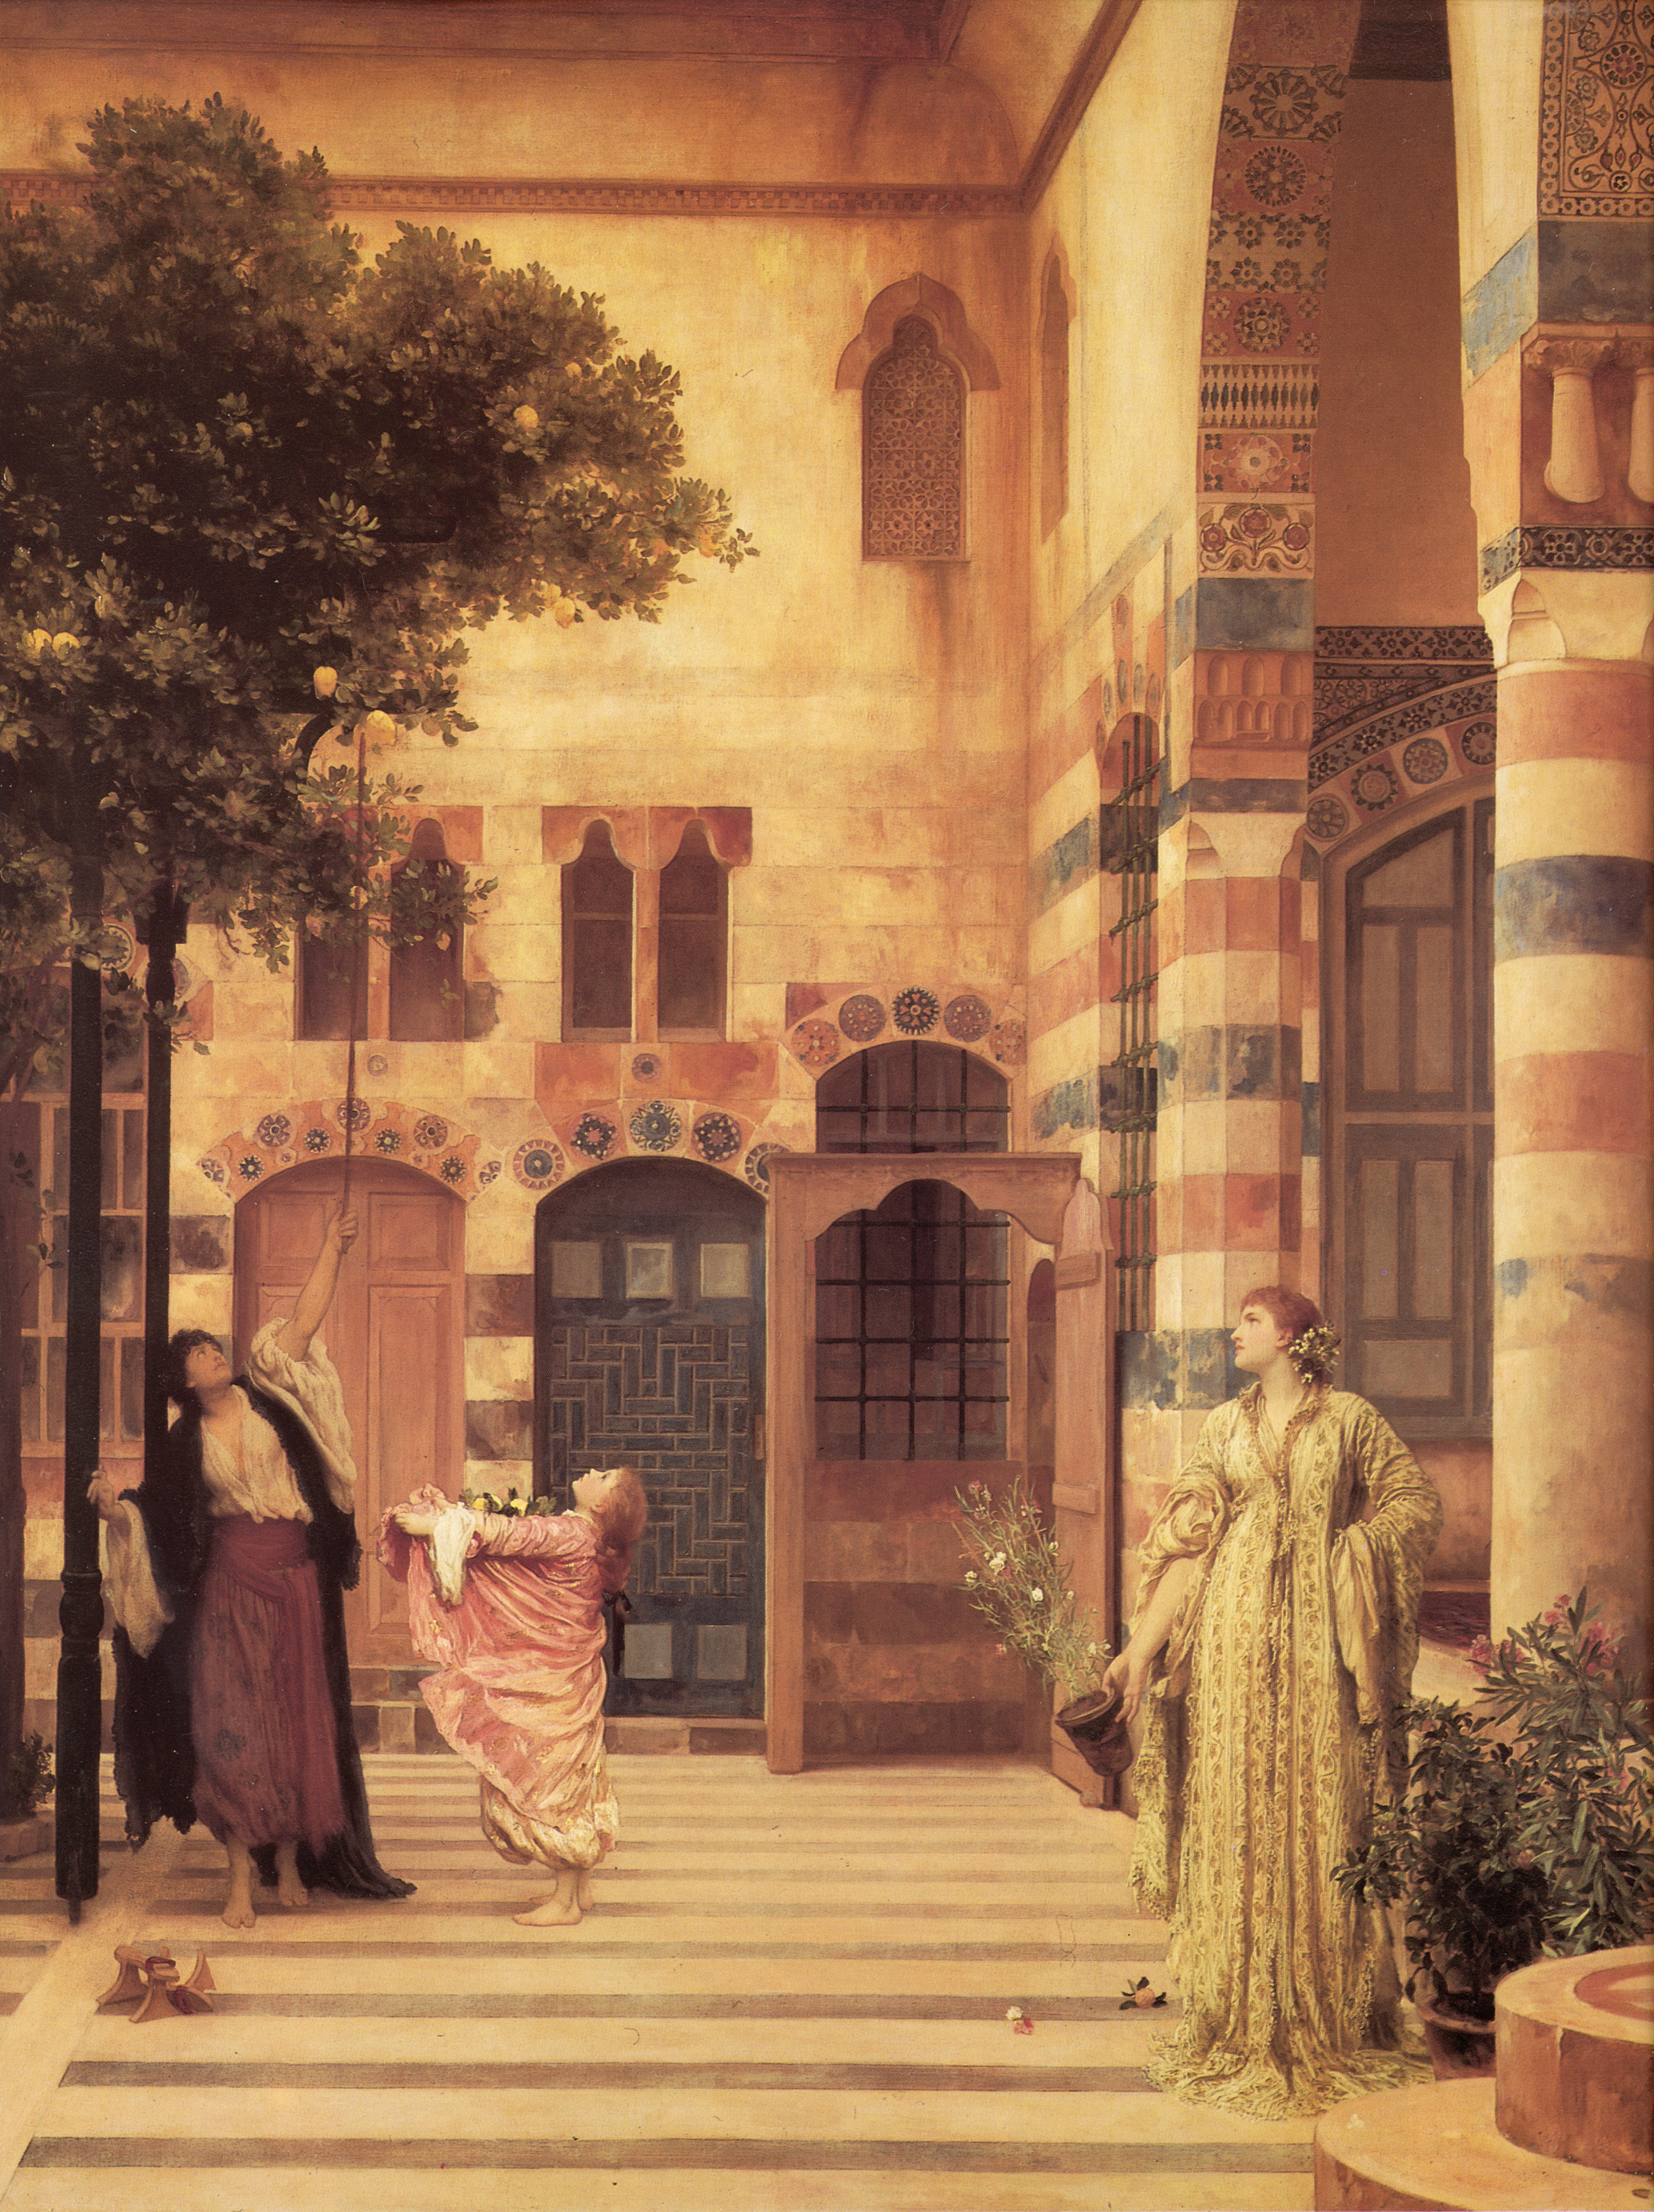 "Old Damascus, Jew's Quarters" by Frederic Leighton